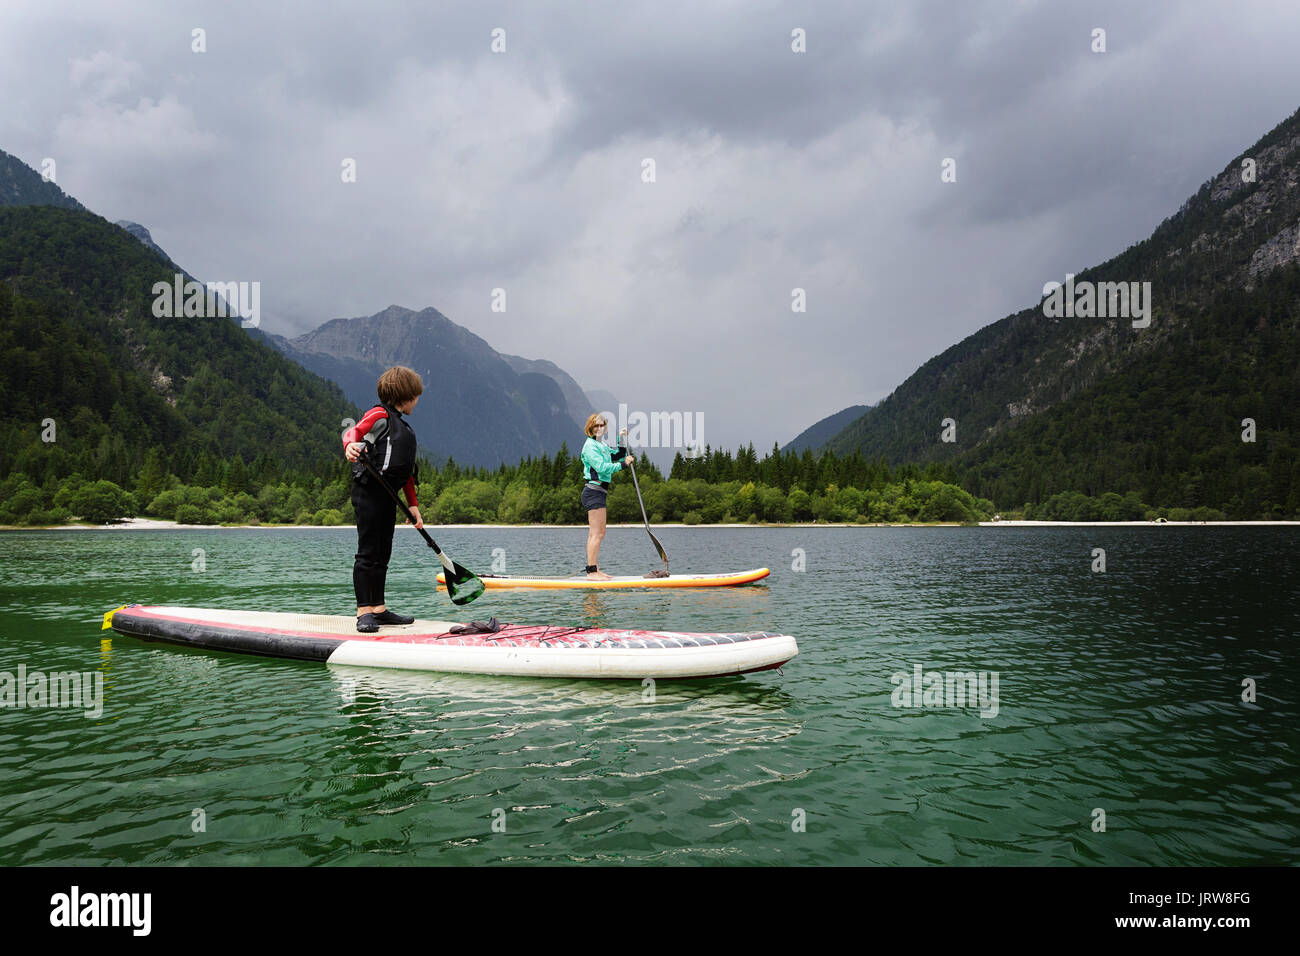 Mother and son in a wet suit paddling on SUP on alpine lake, Lago di Predil, Itlay. Stock Photo